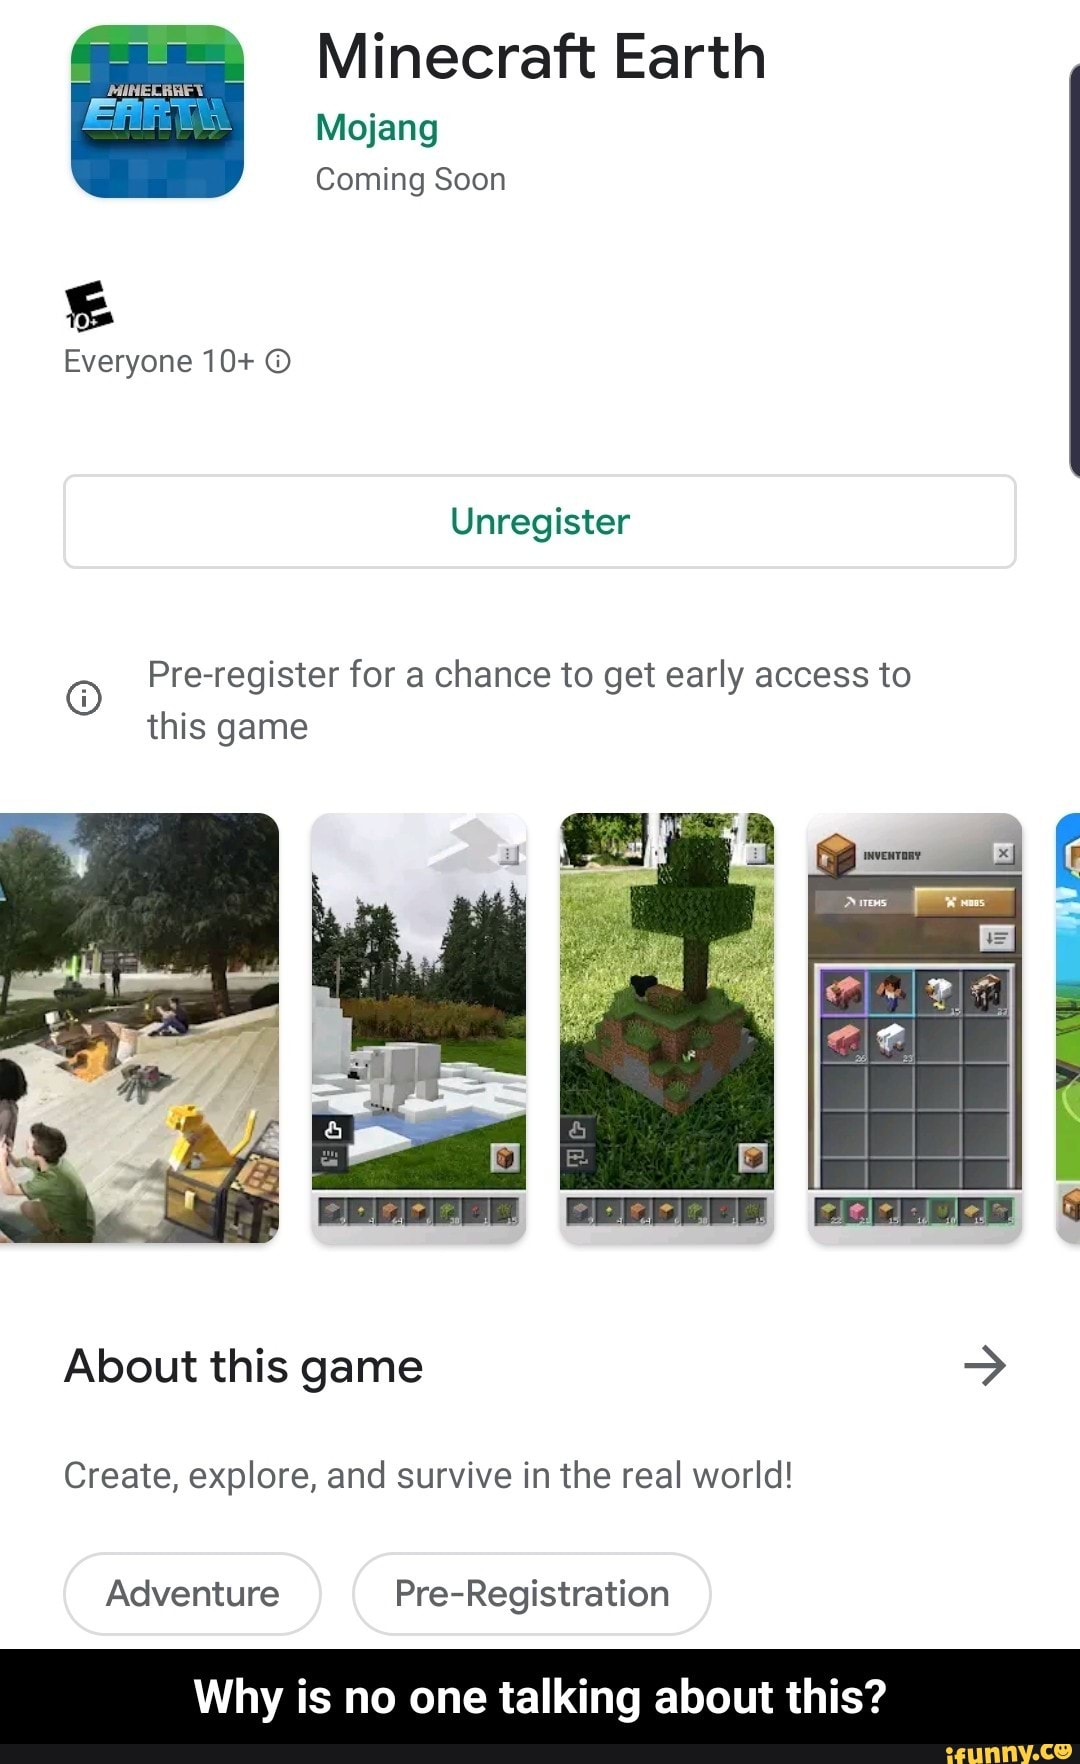 Pre-Register for Minecraft Earth